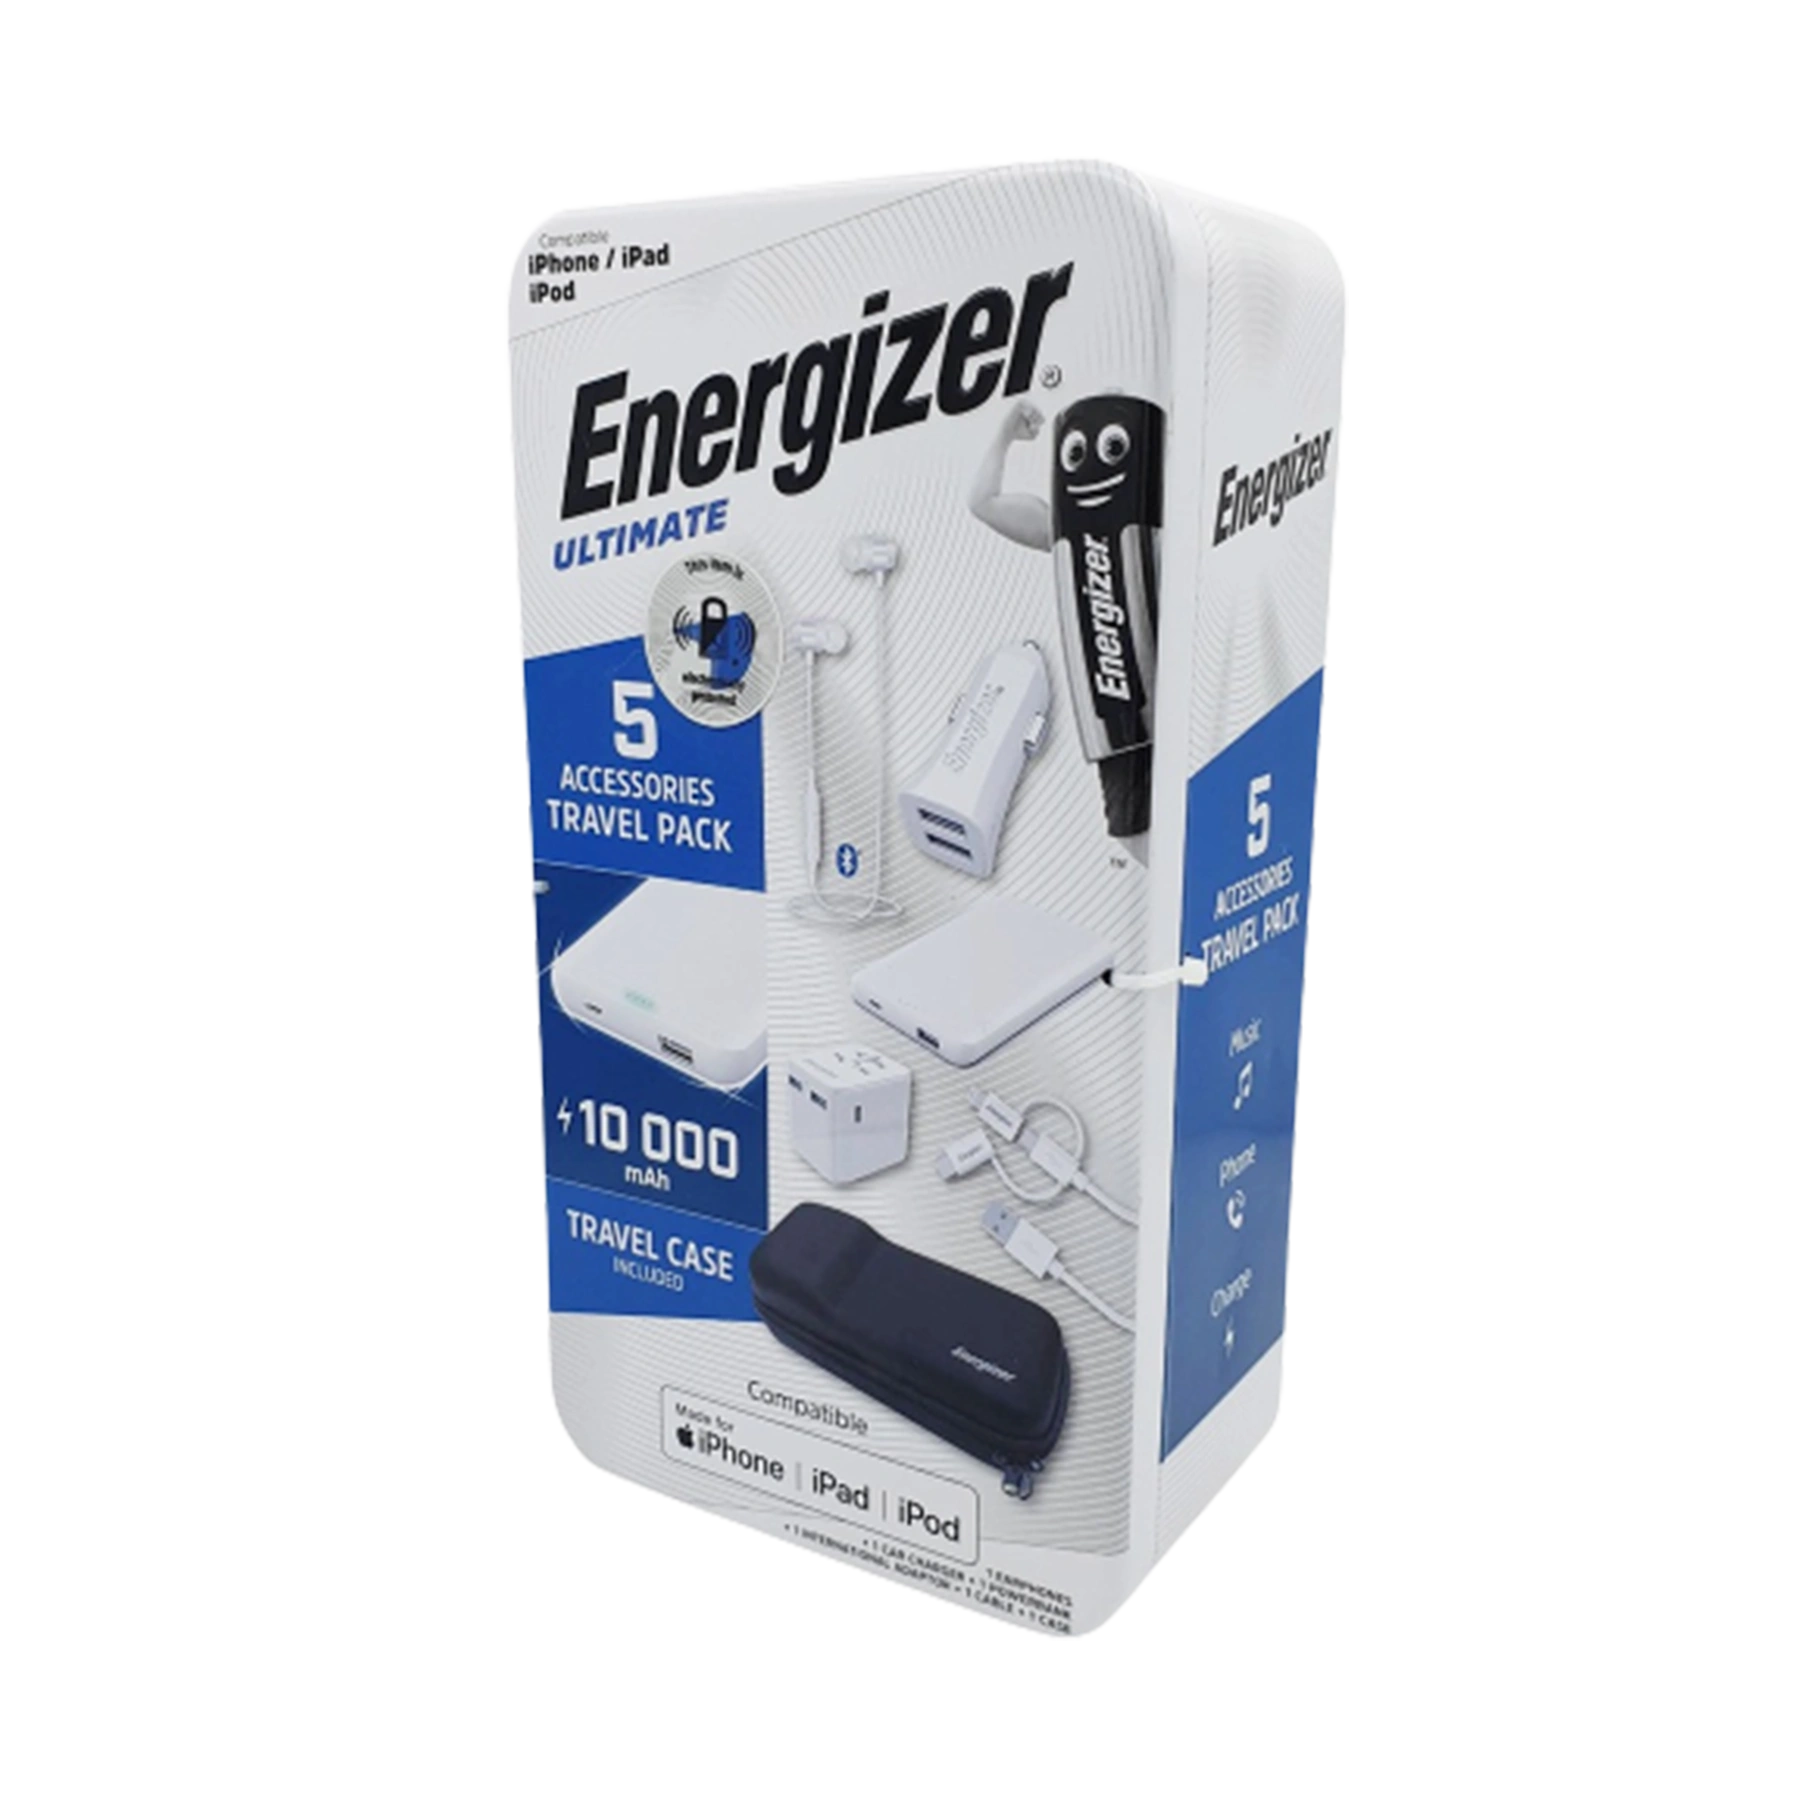 energizer-5-in-1travel-accessories-pack-tpandroid